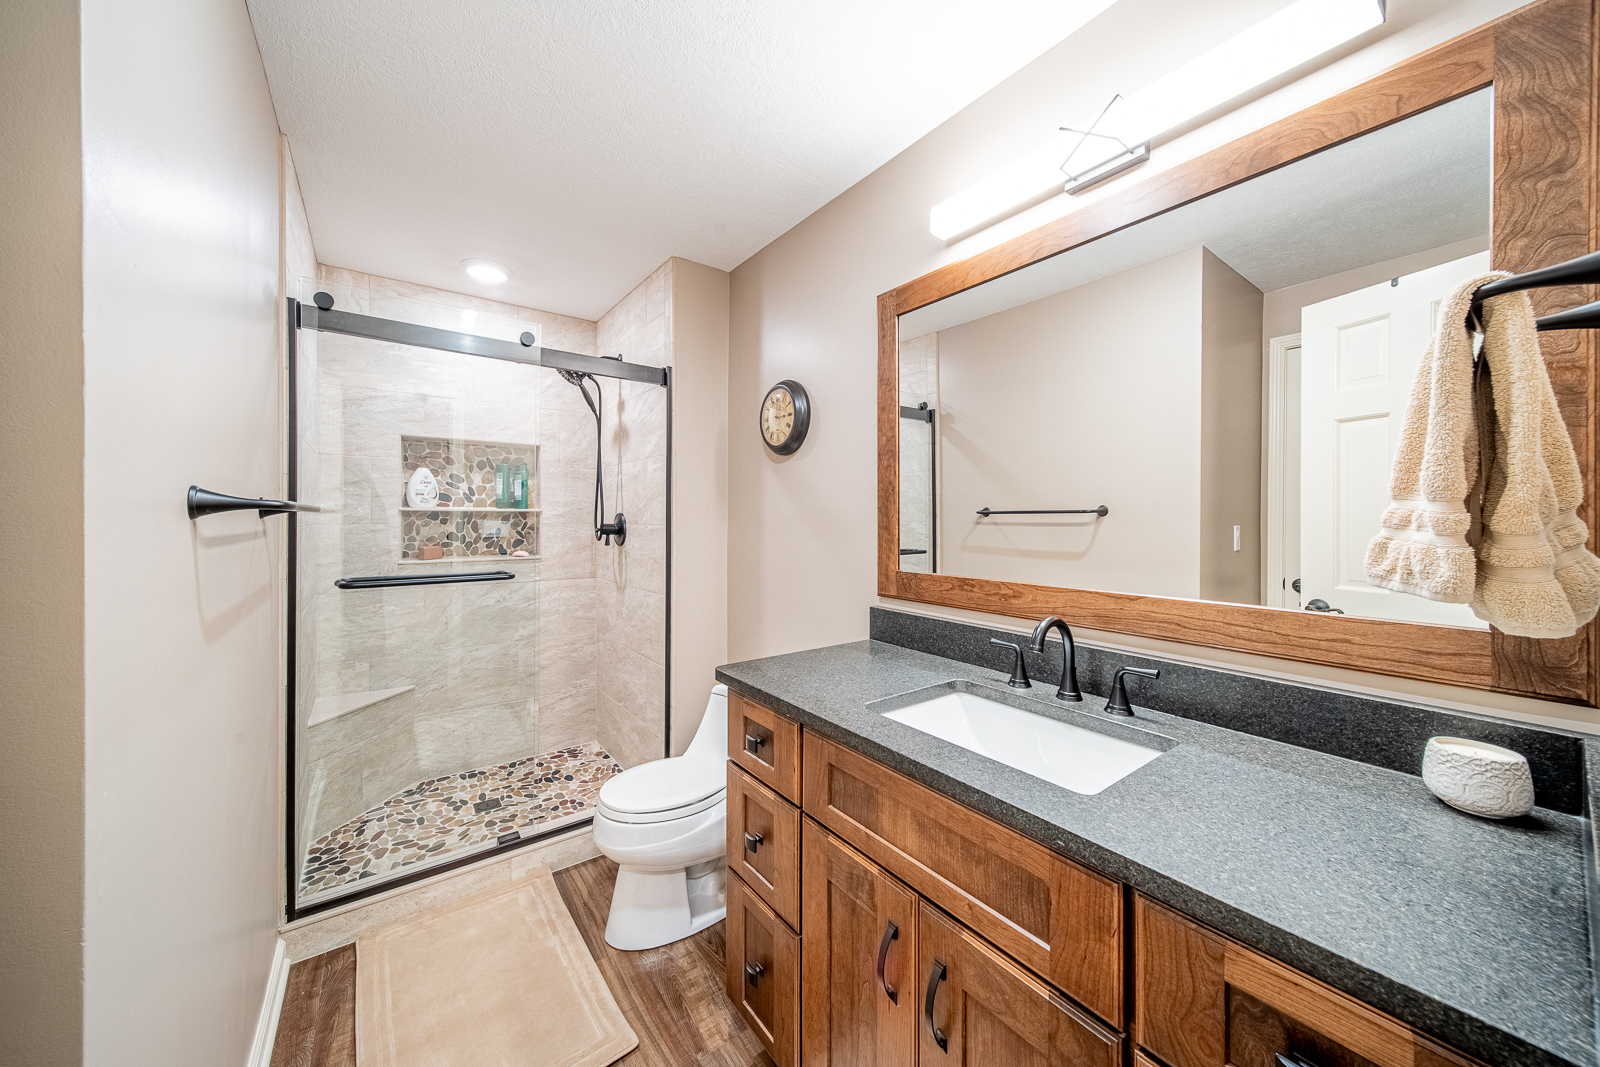 Spacious full bathroom with walk-in shower in Lafayette basement remodel.